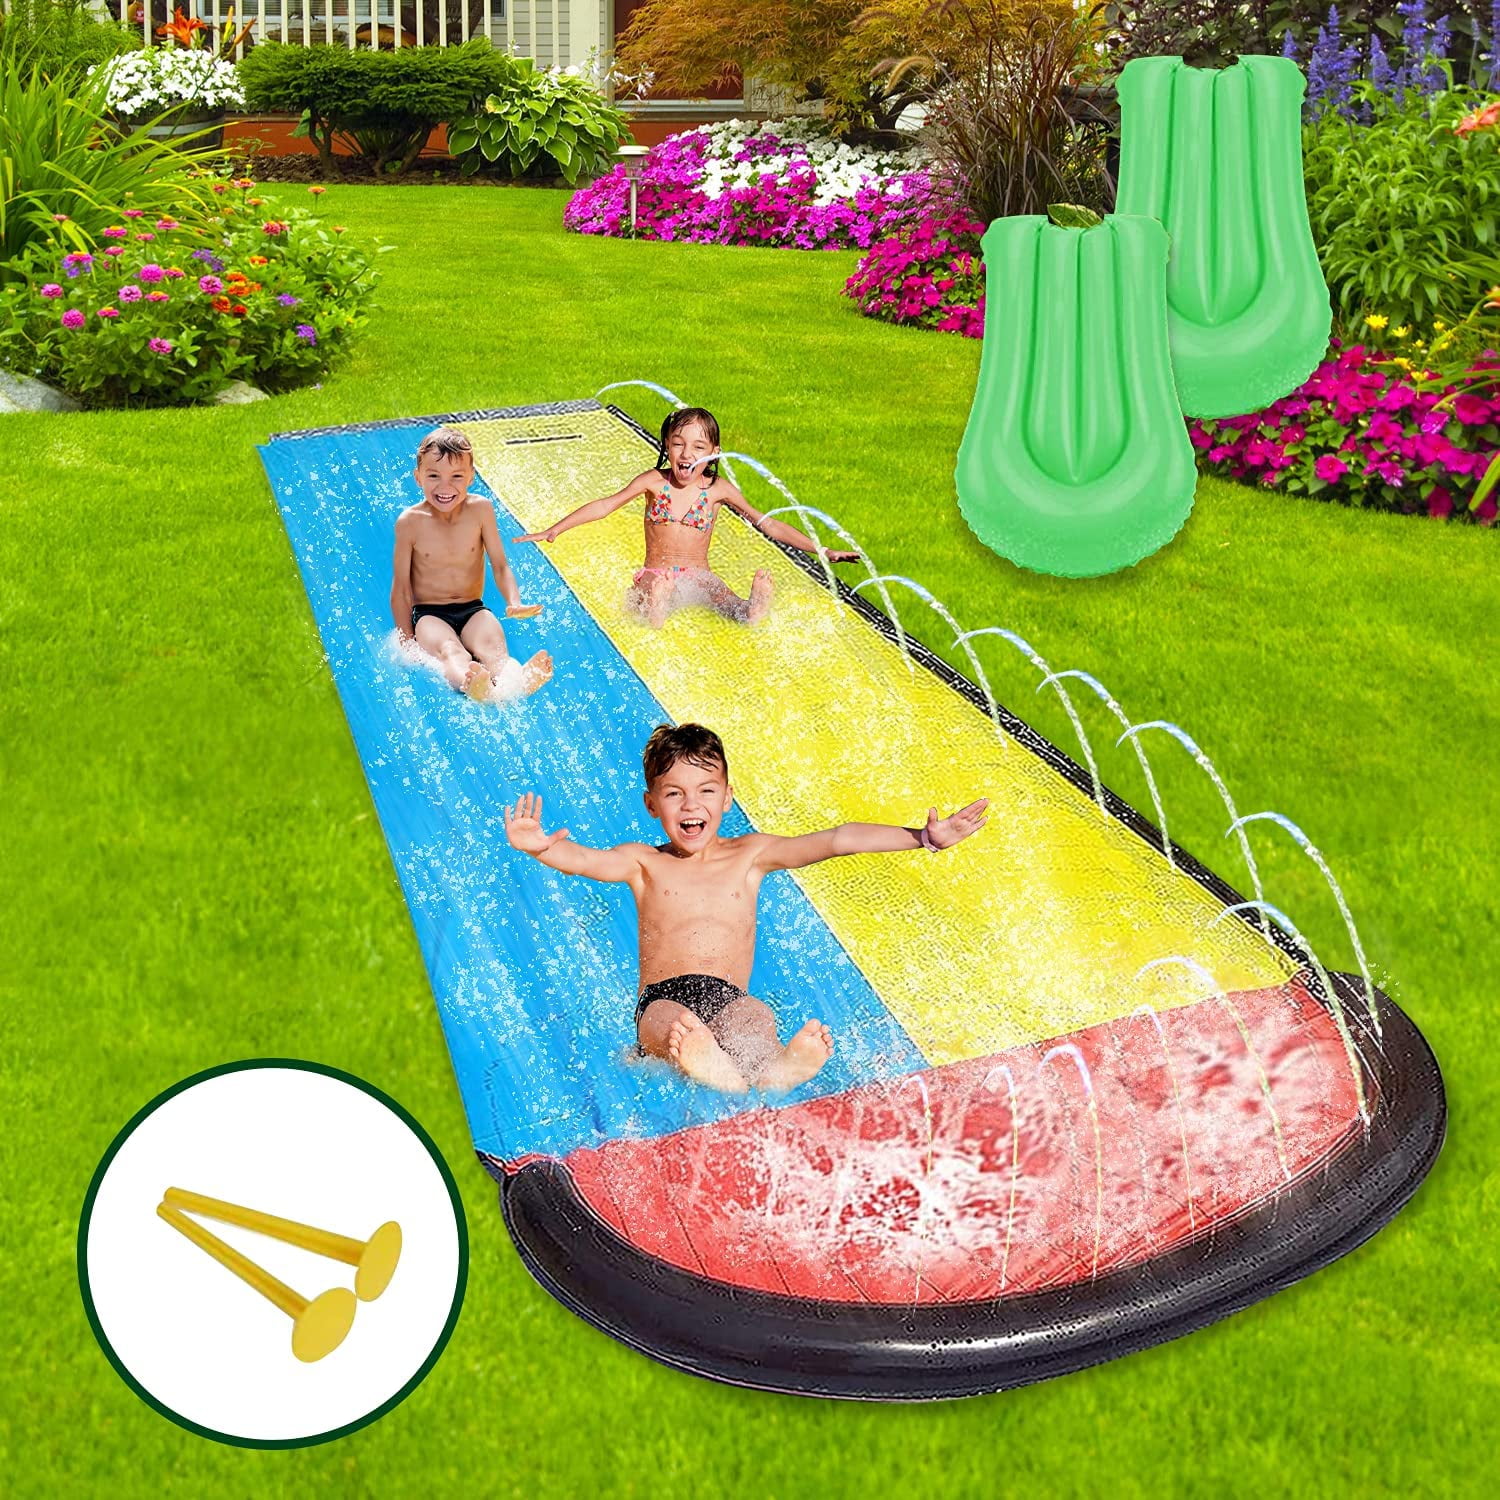 N/K Water Slide Lawn Water Slides Thick Durable Racing Slip Slide Mat with Splash Sprinkler and Inflatable Crash Pad Inflatable Spray Water Toy for Kids Adults Outdoor Game 